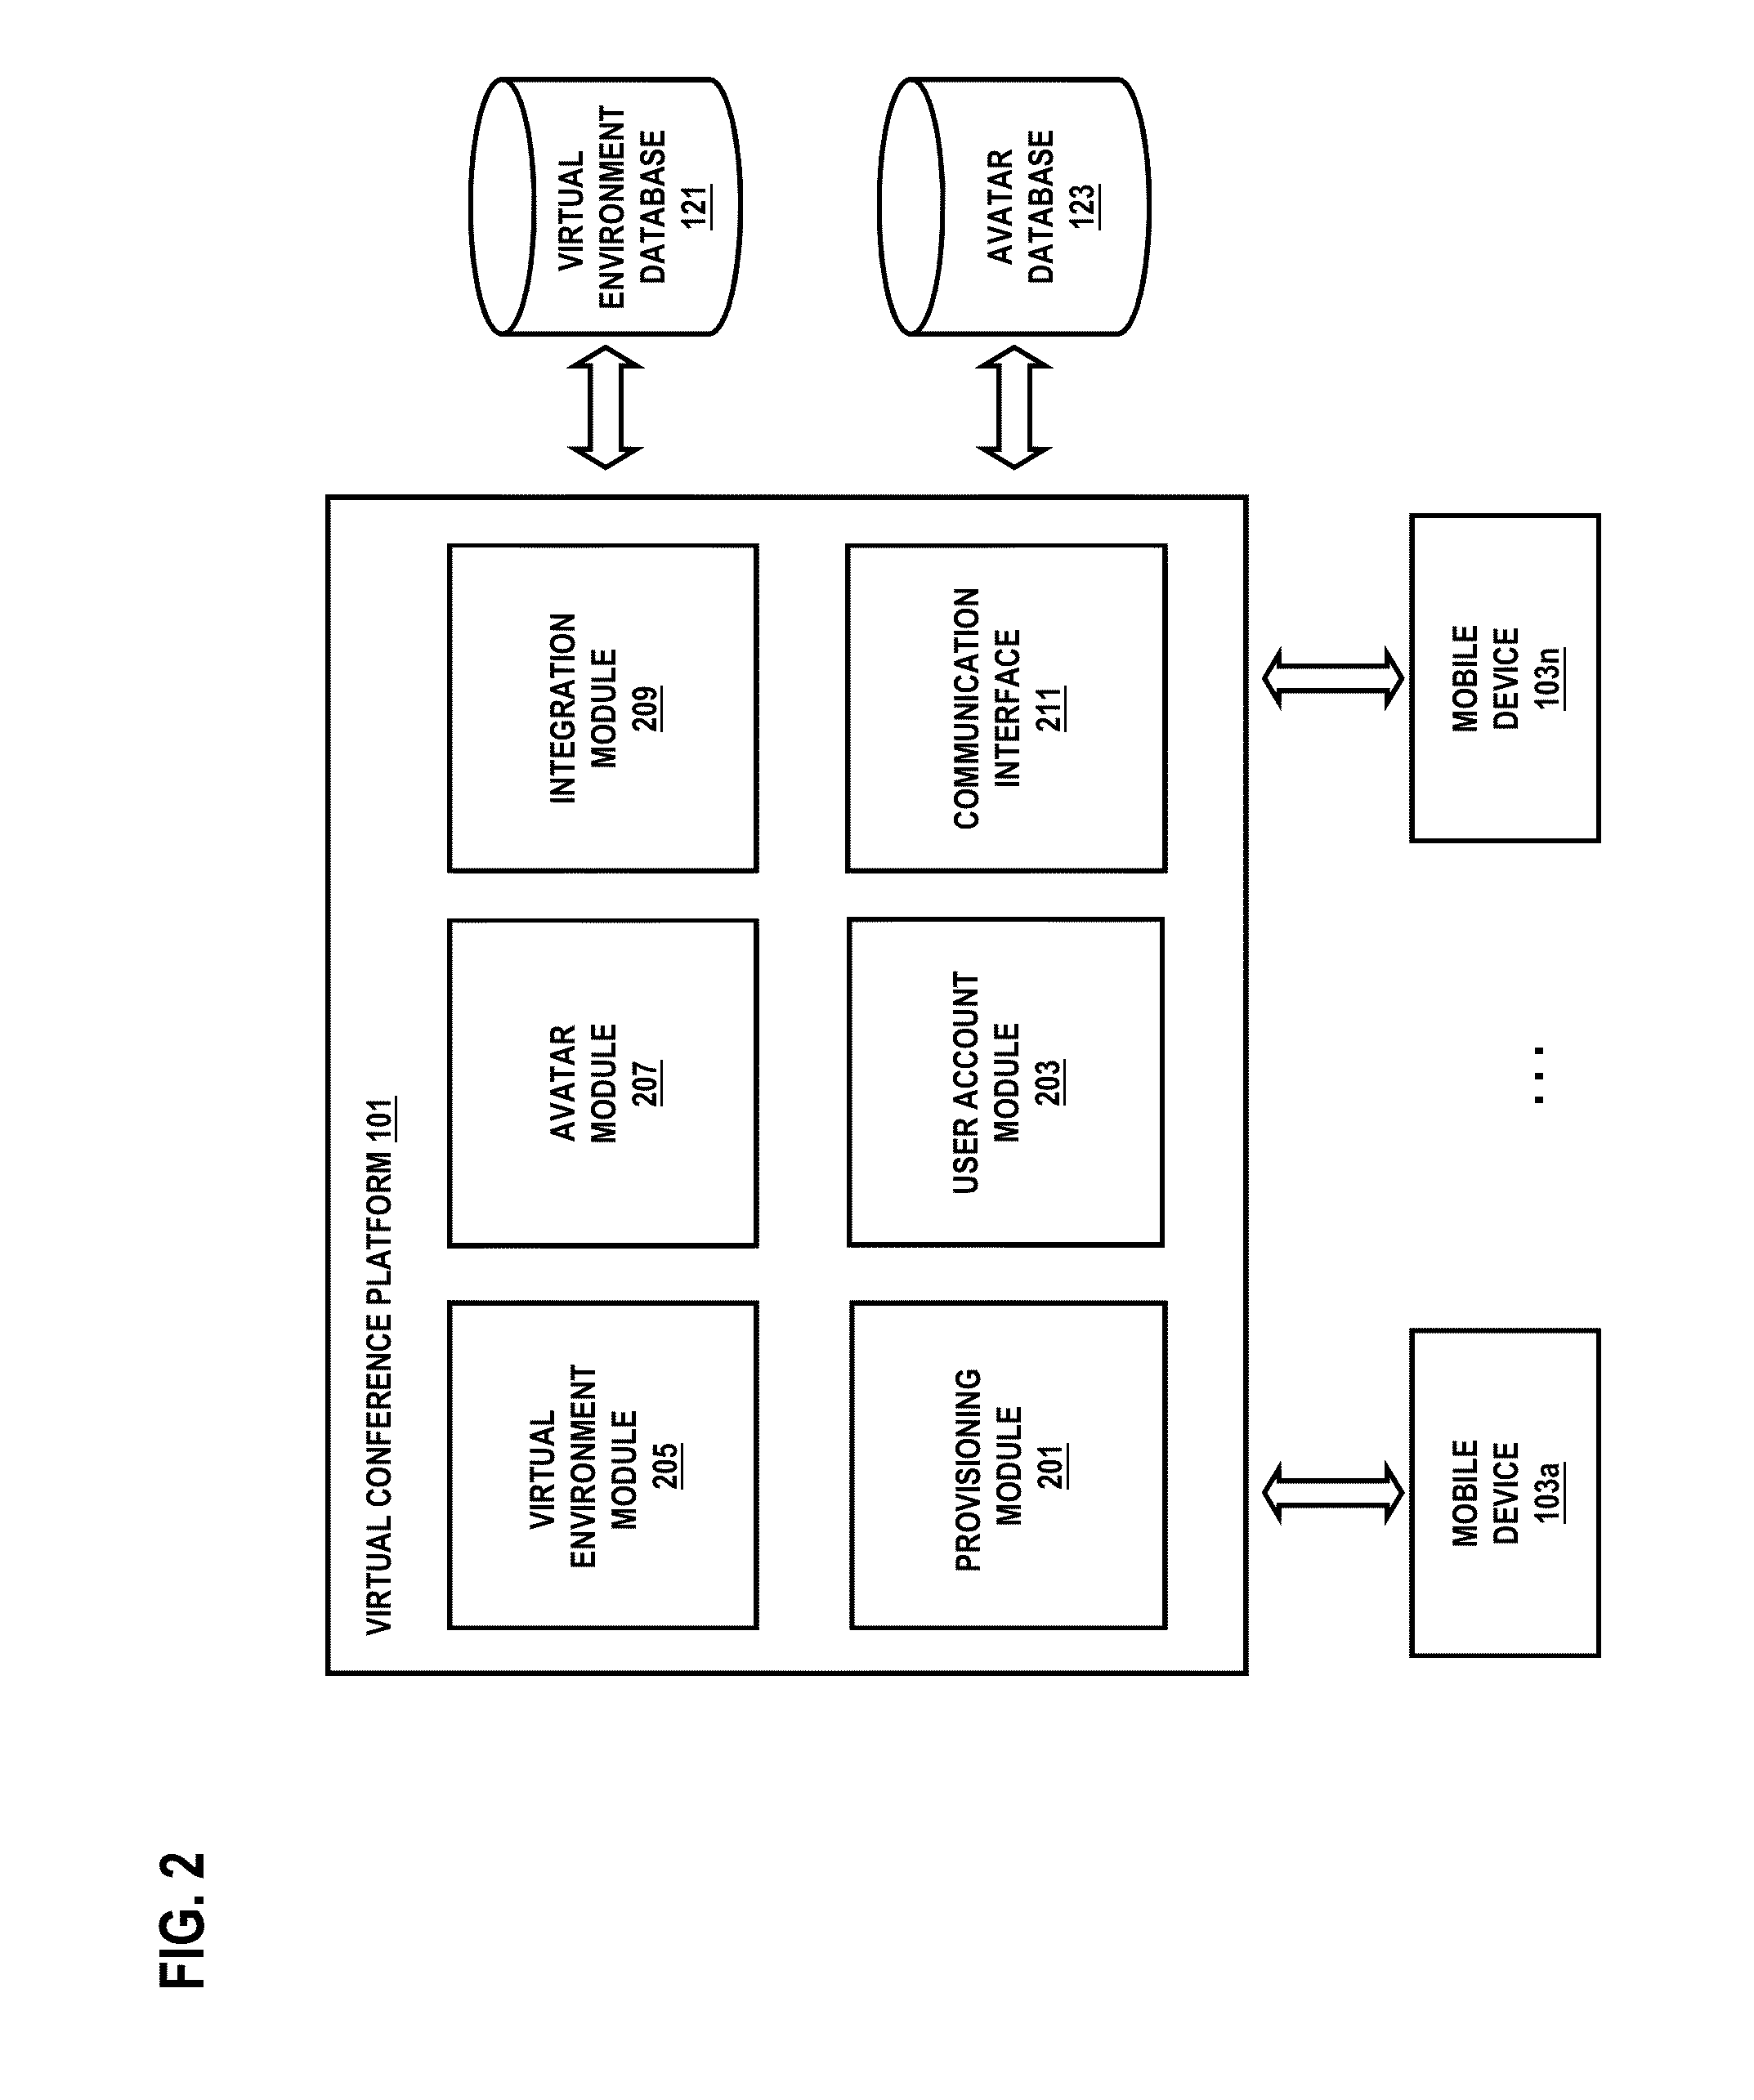 Method and system for providing virtual conferencing